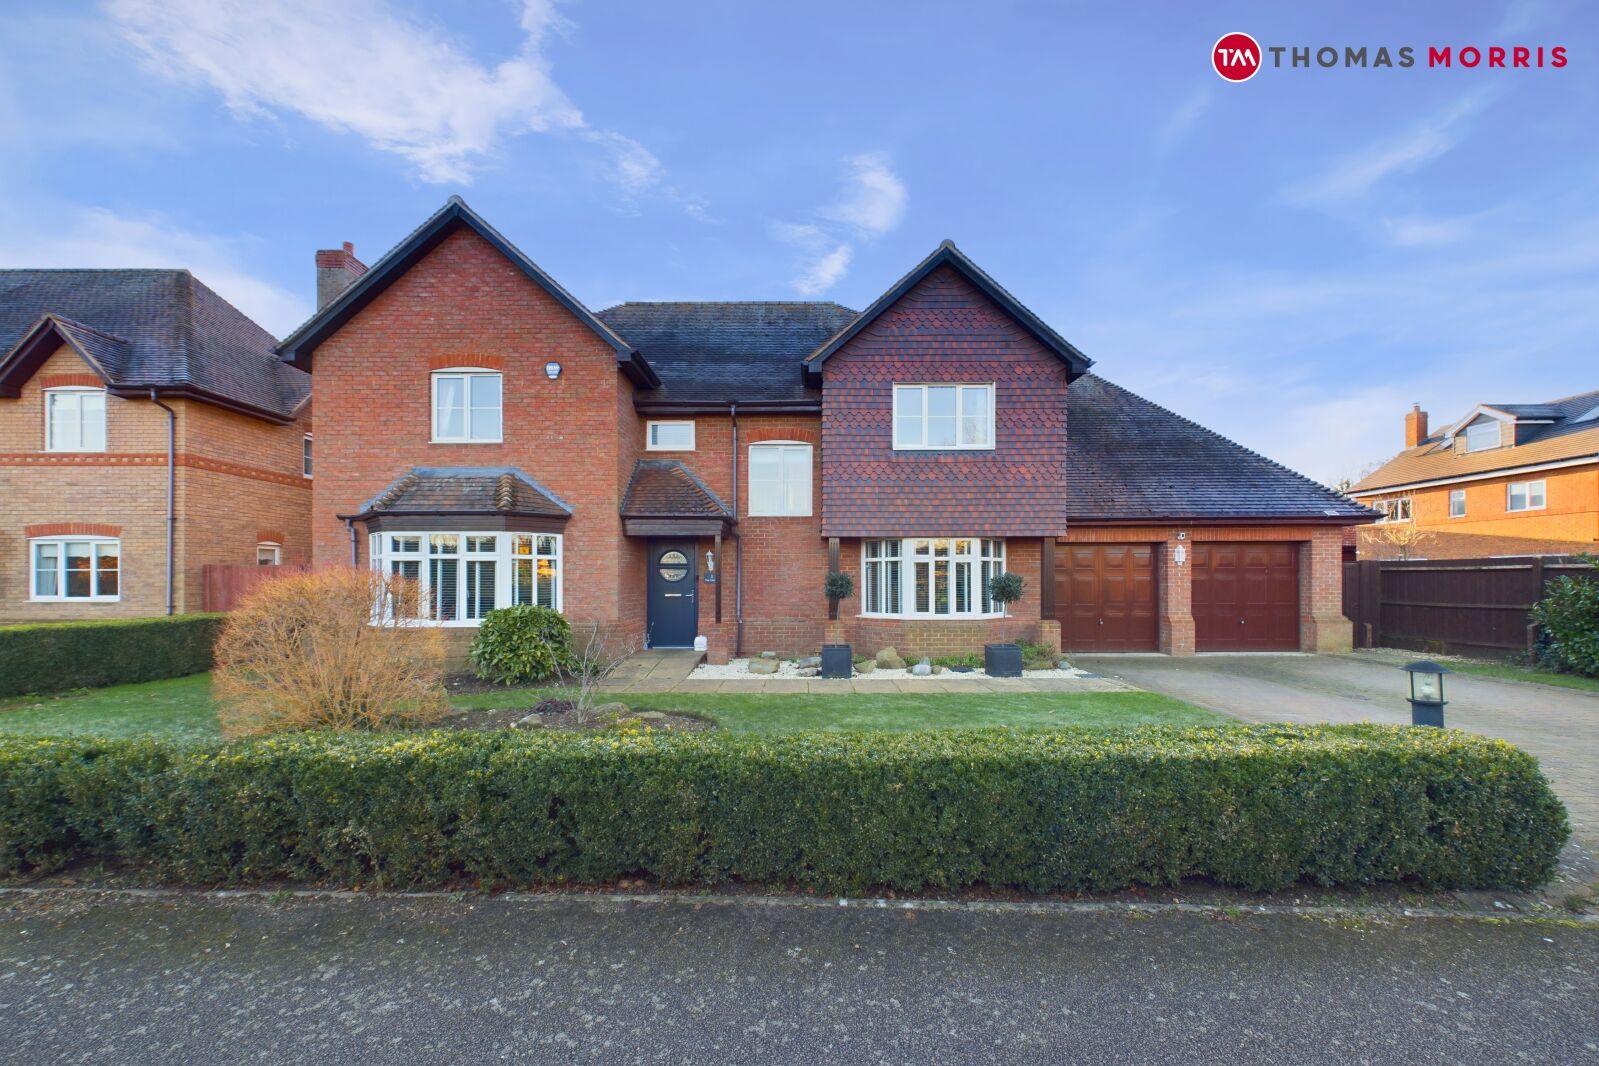 5 bedroom detached house for sale The Cloches, Beeston, SG19, main image